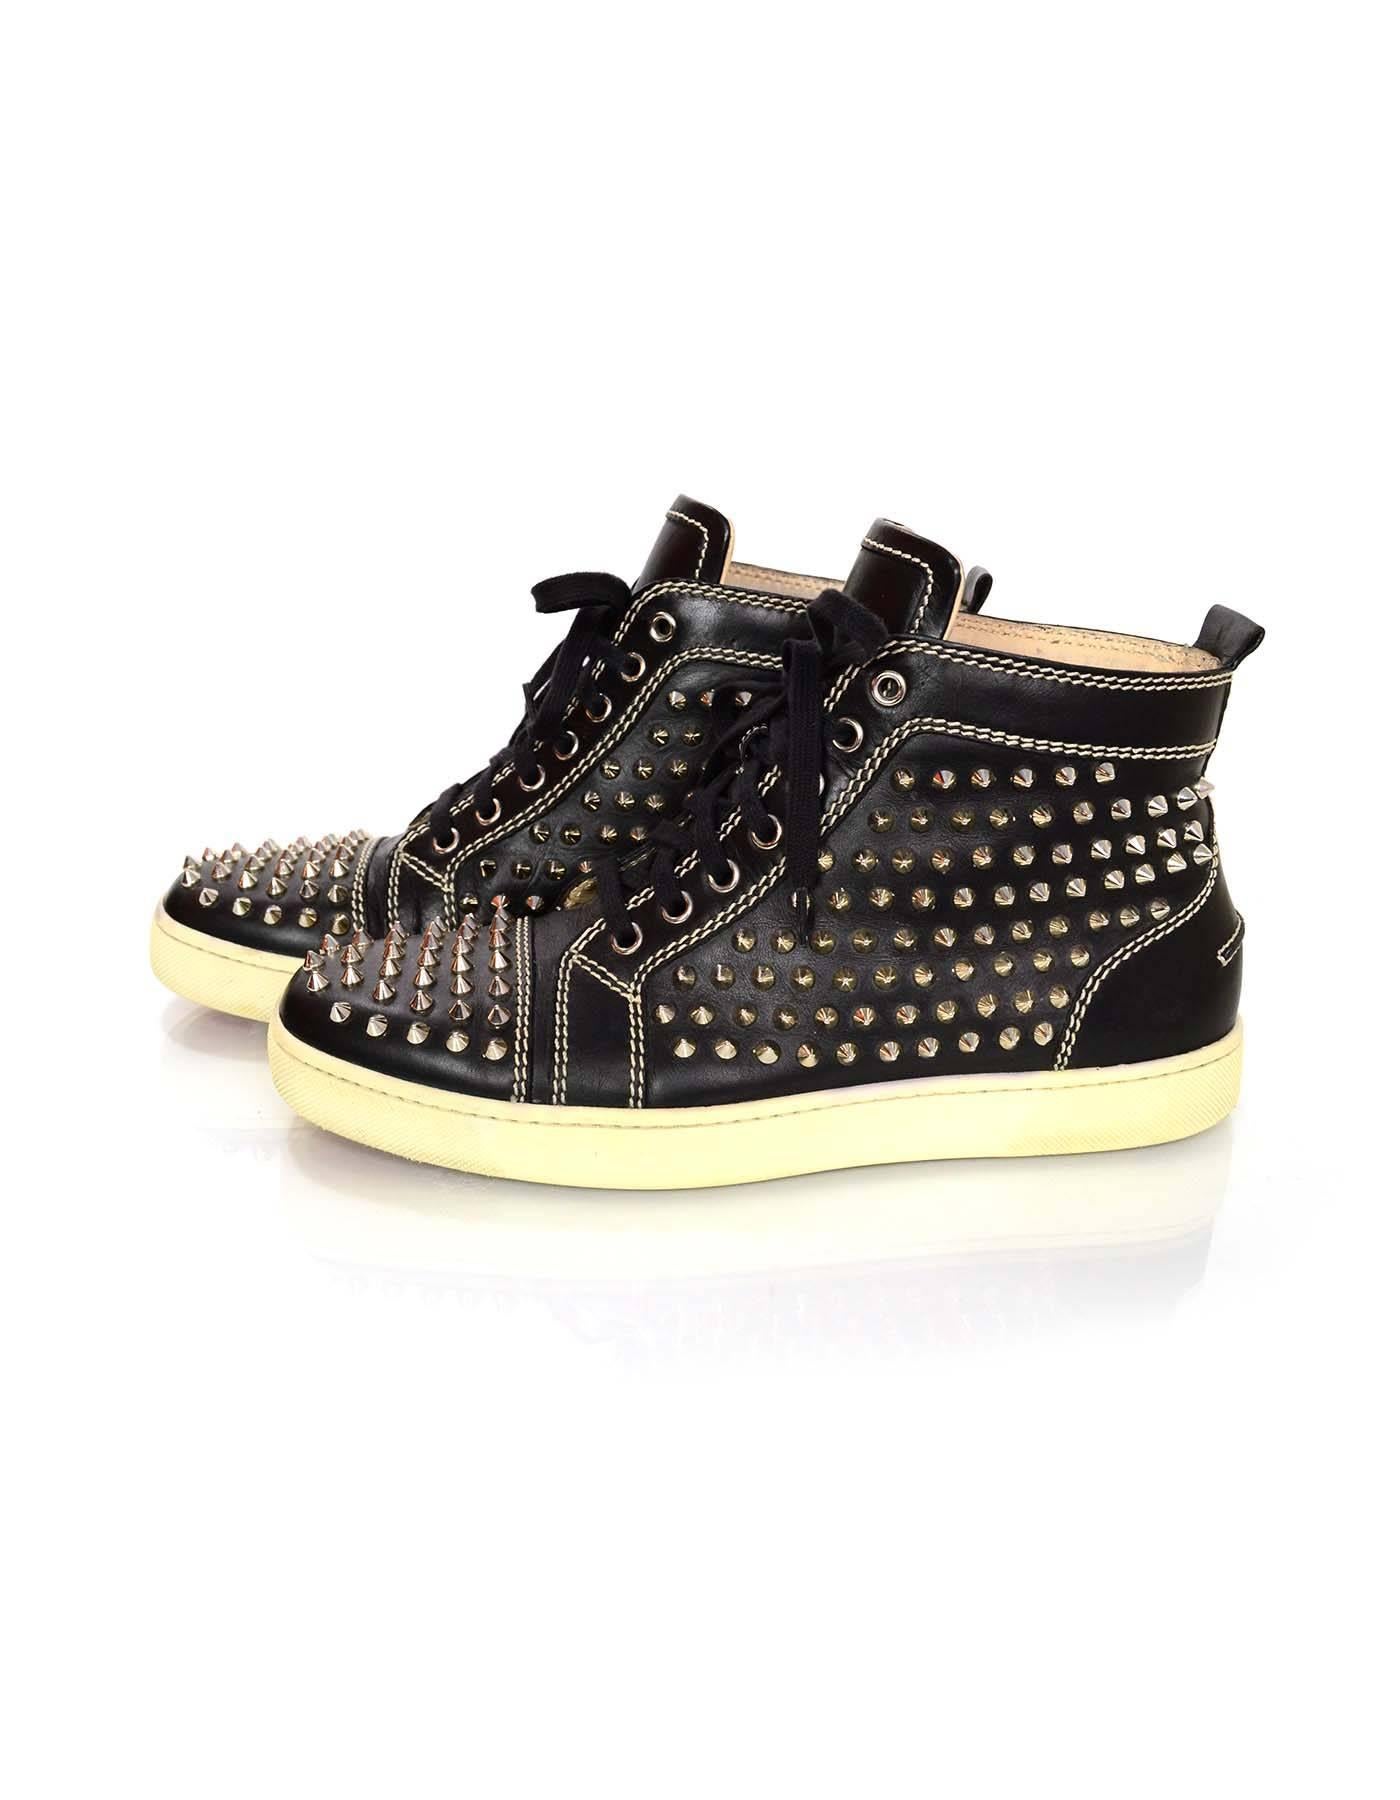 Christian Louboutin Leather Louis Spike Sneakers Sz 41

Features silvertone studding throughout

Color: Black, silvertone
Materials: Leather, rubber, metal
Closure/Opening: Lace tie closure
Retail Price: $1,295 + tax
Sole Stamp: Christian